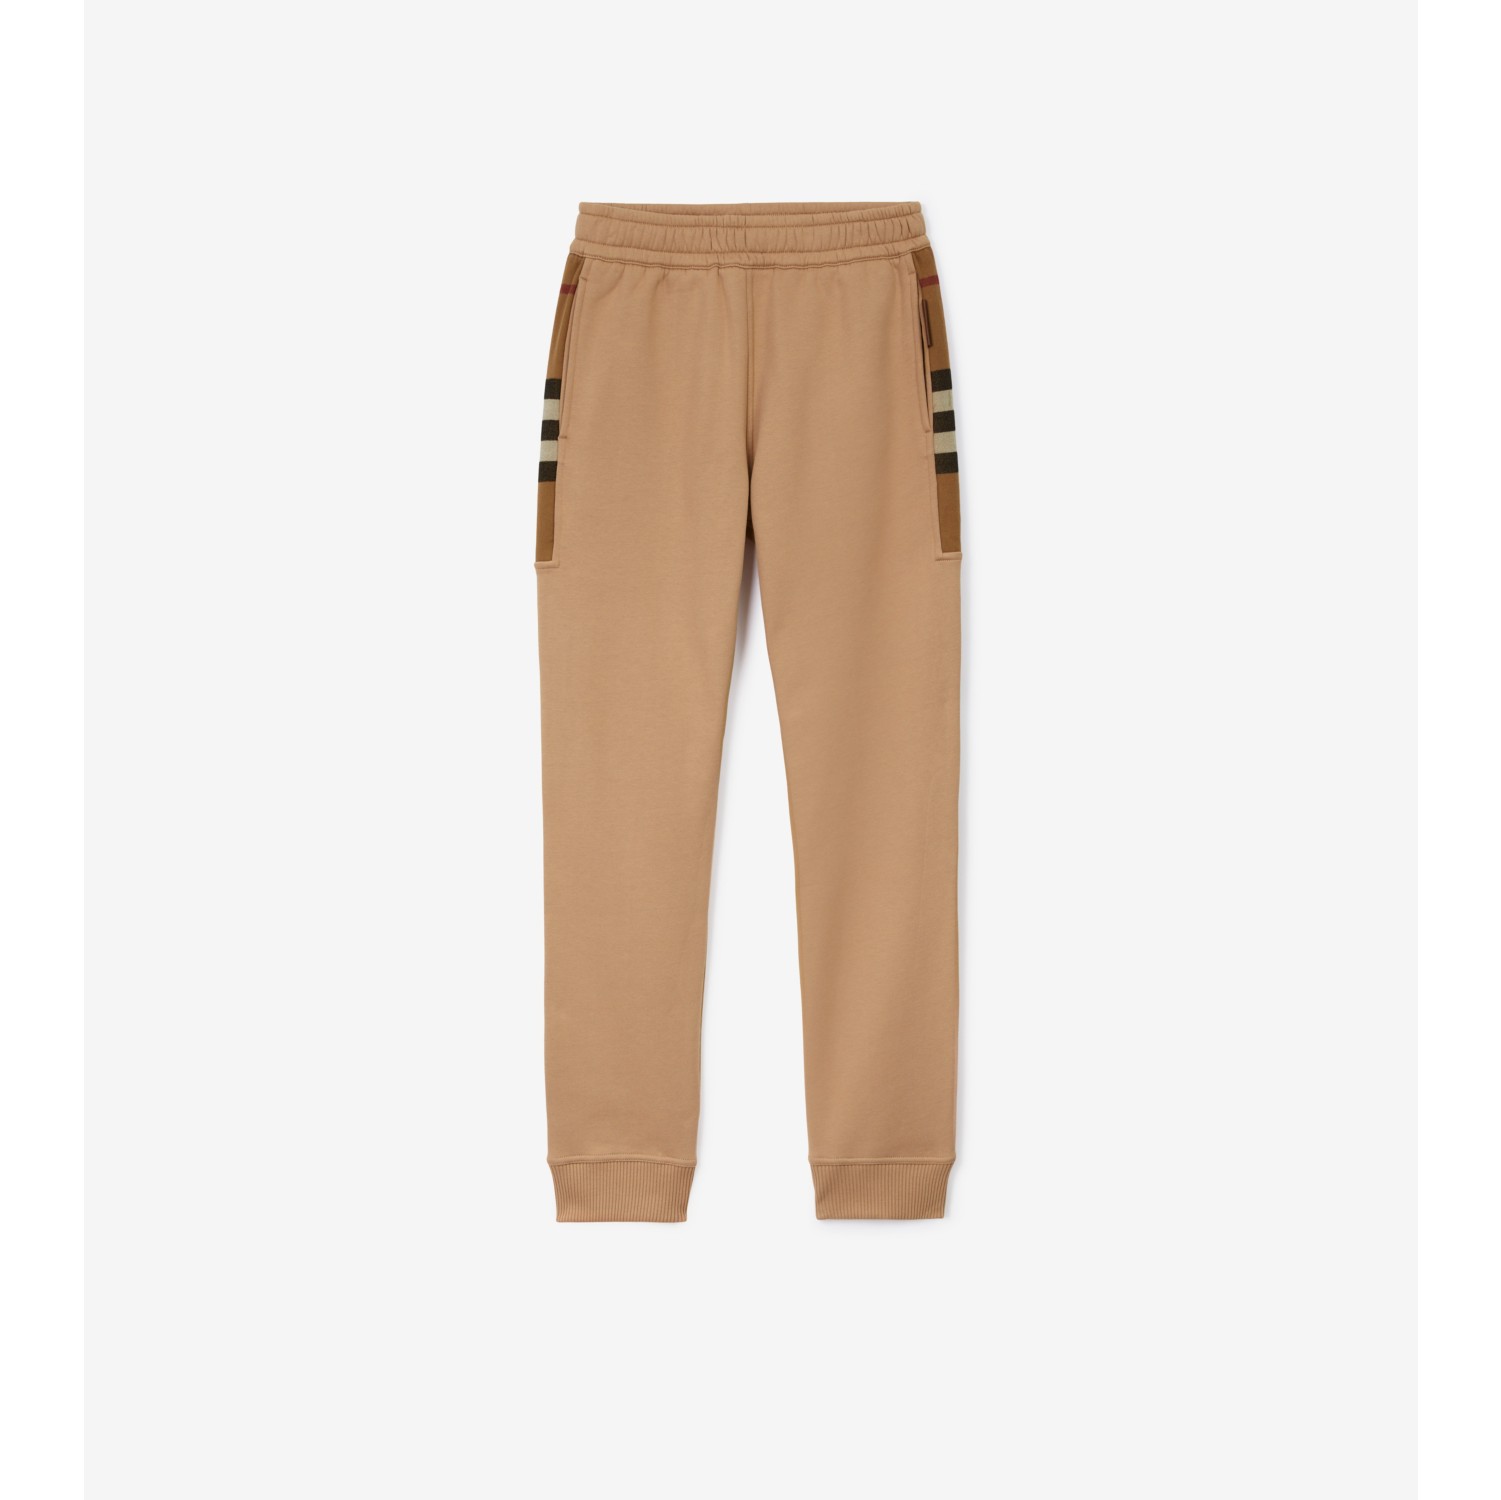 BURBERRY 7/8 pants in jogger style in camel